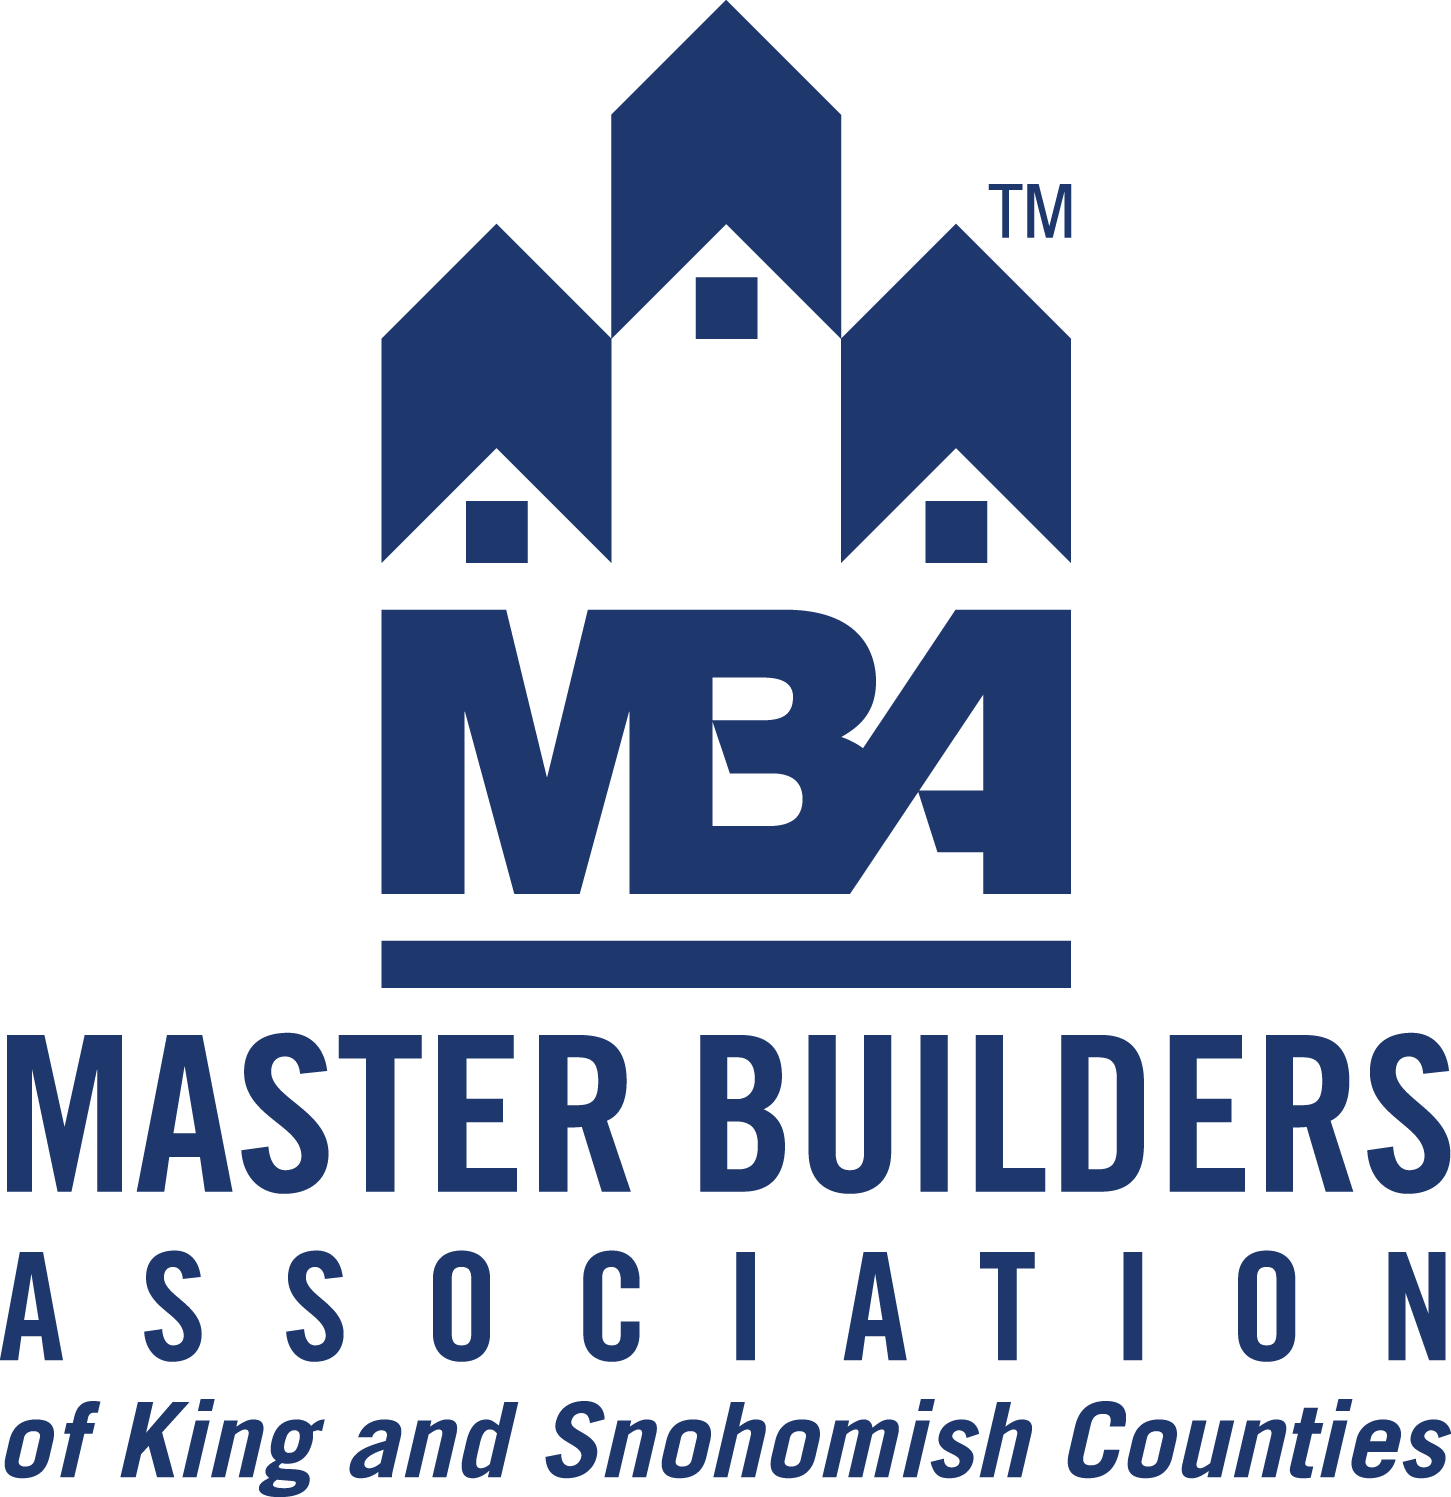 Read more articles from Master Builders Association